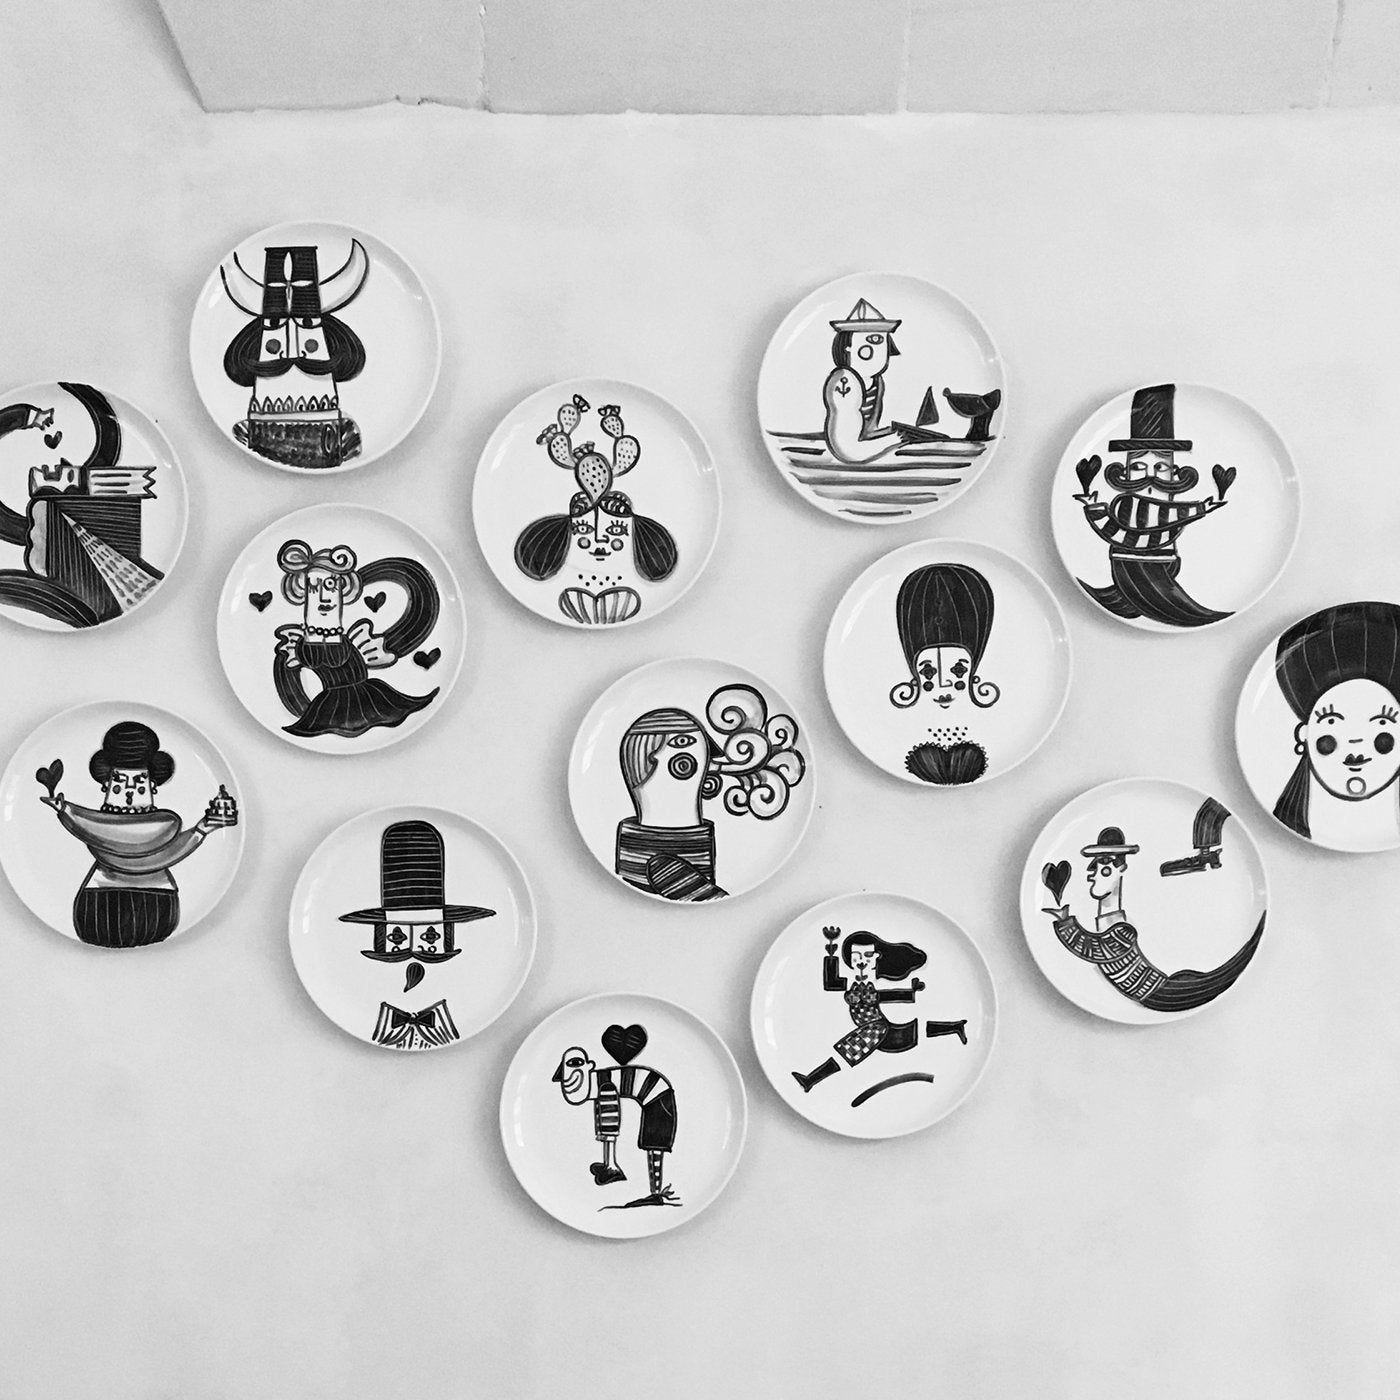 Alberto Black and White Stories Plate Collection  - Alternative view 3